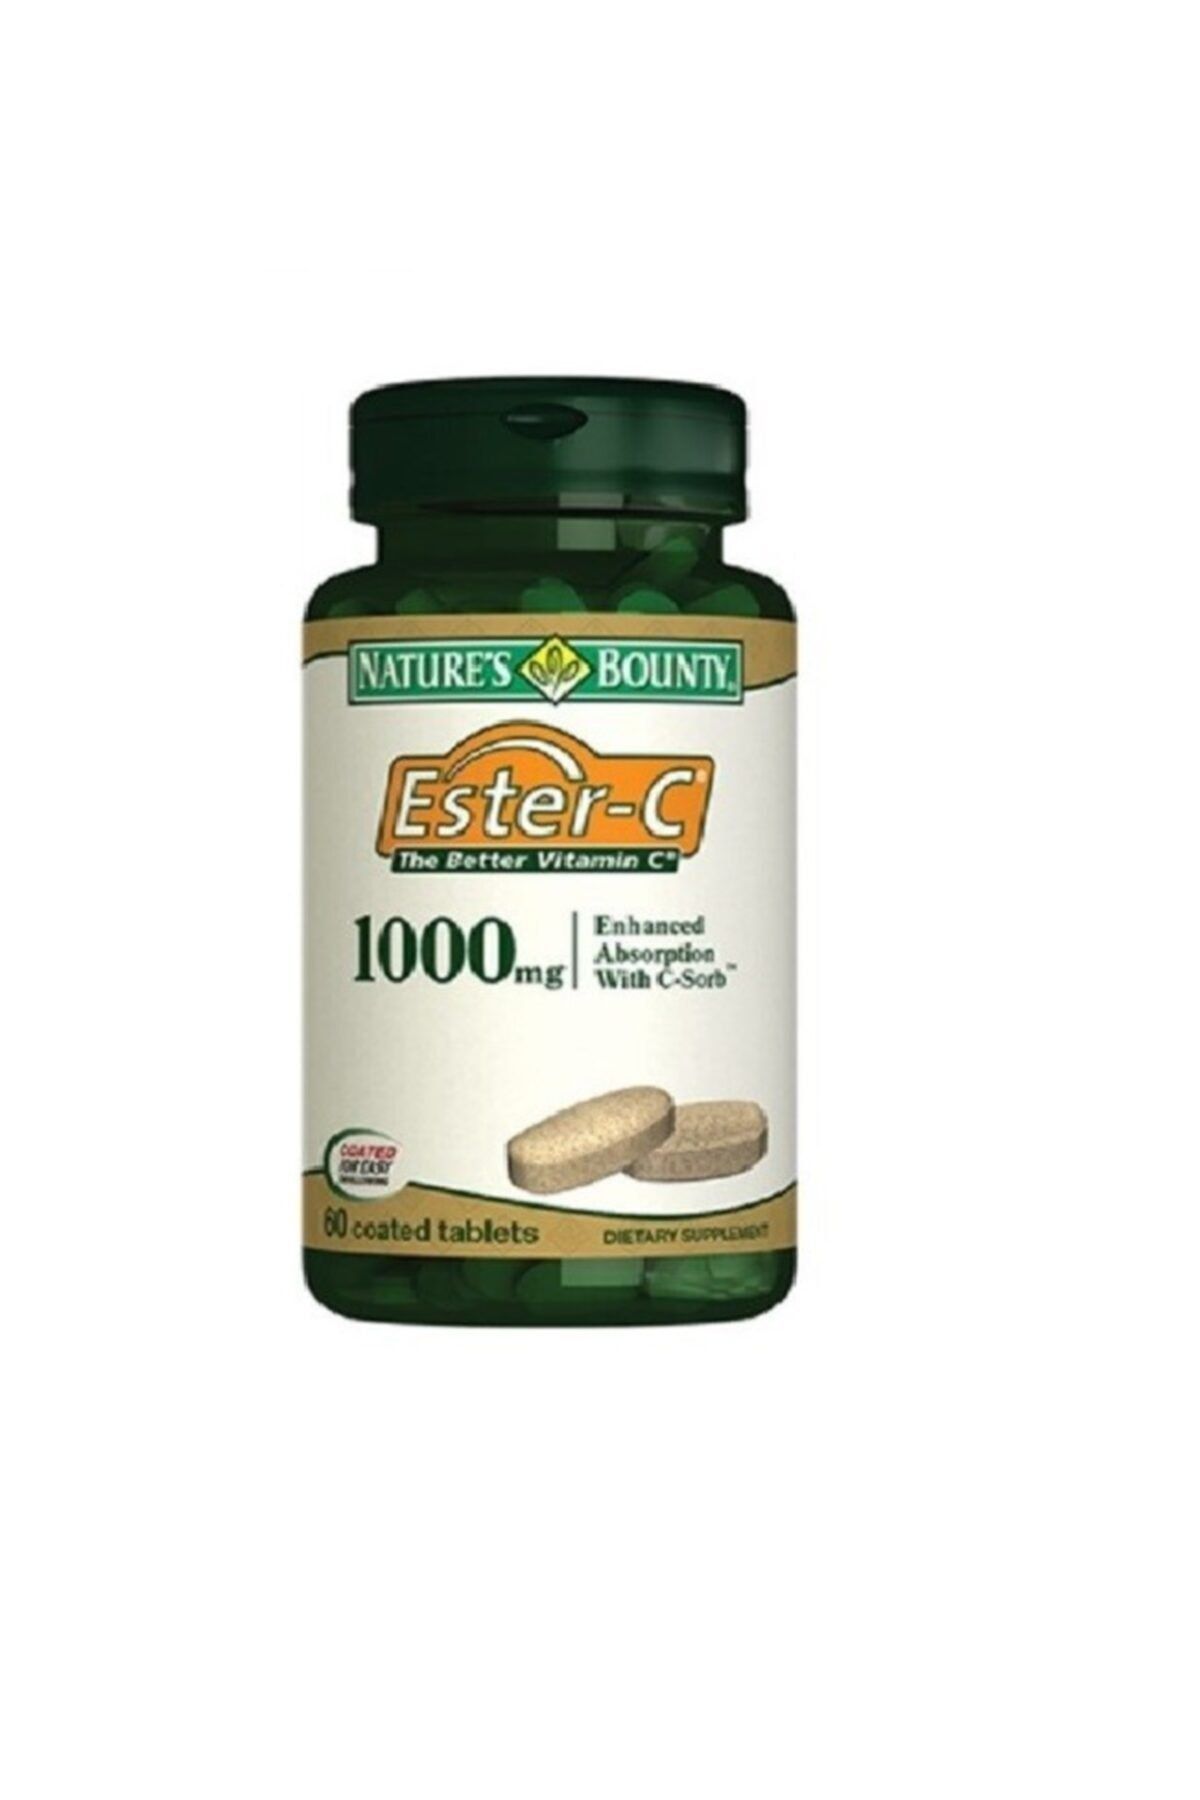 Natures Bounty Ester C 1000 Mg 60 Tablet